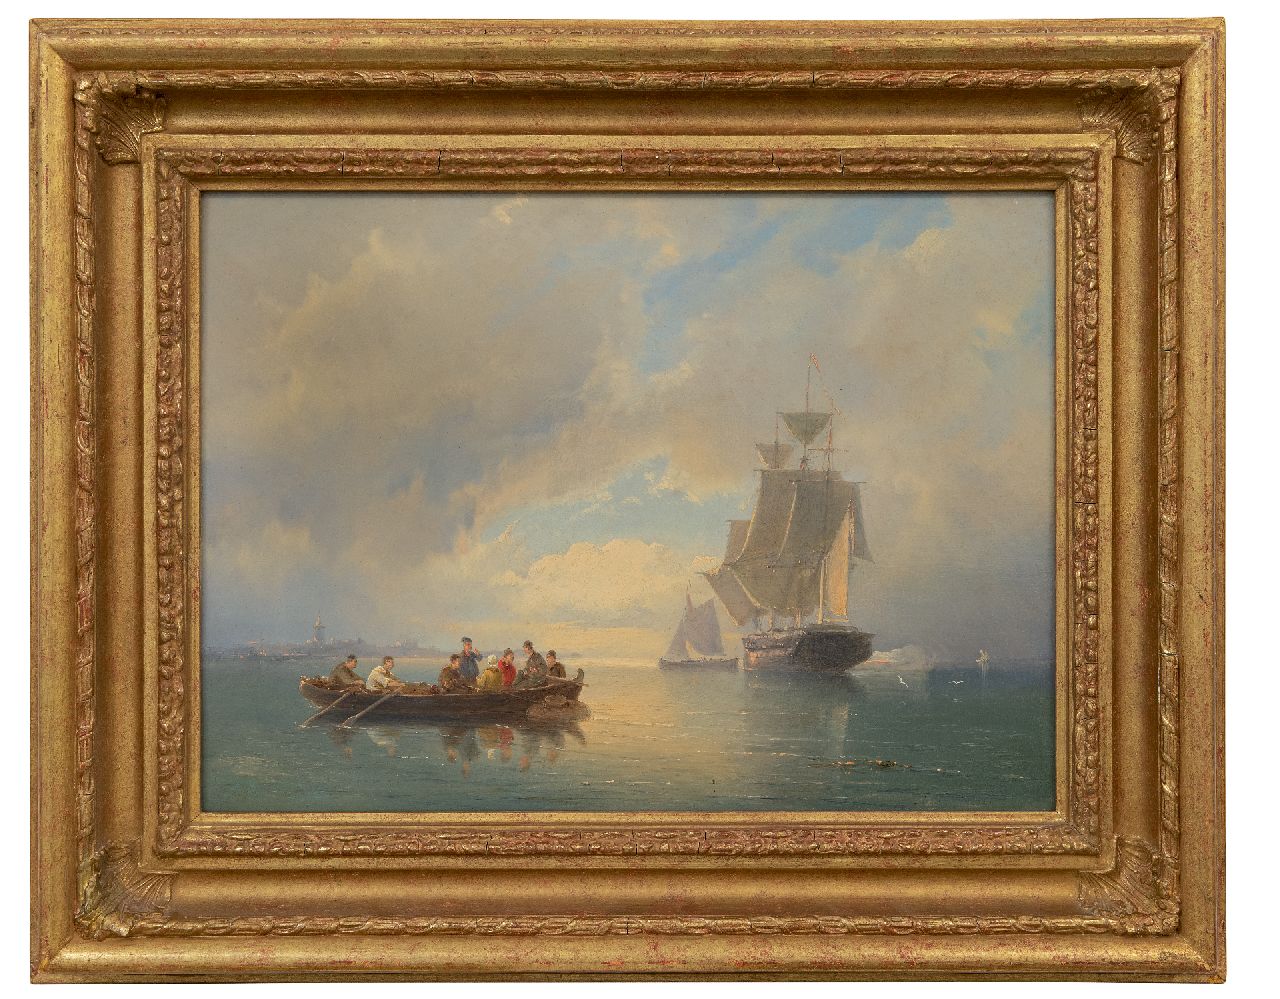 Dommershuijzen P.C.  | Pieter Cornelis Dommershuijzen | Paintings offered for sale | A war craft firing a salute off the coast, oil on canvas 27.5 x 38.1 cm, signed l.l. indistinctly and dated 1884